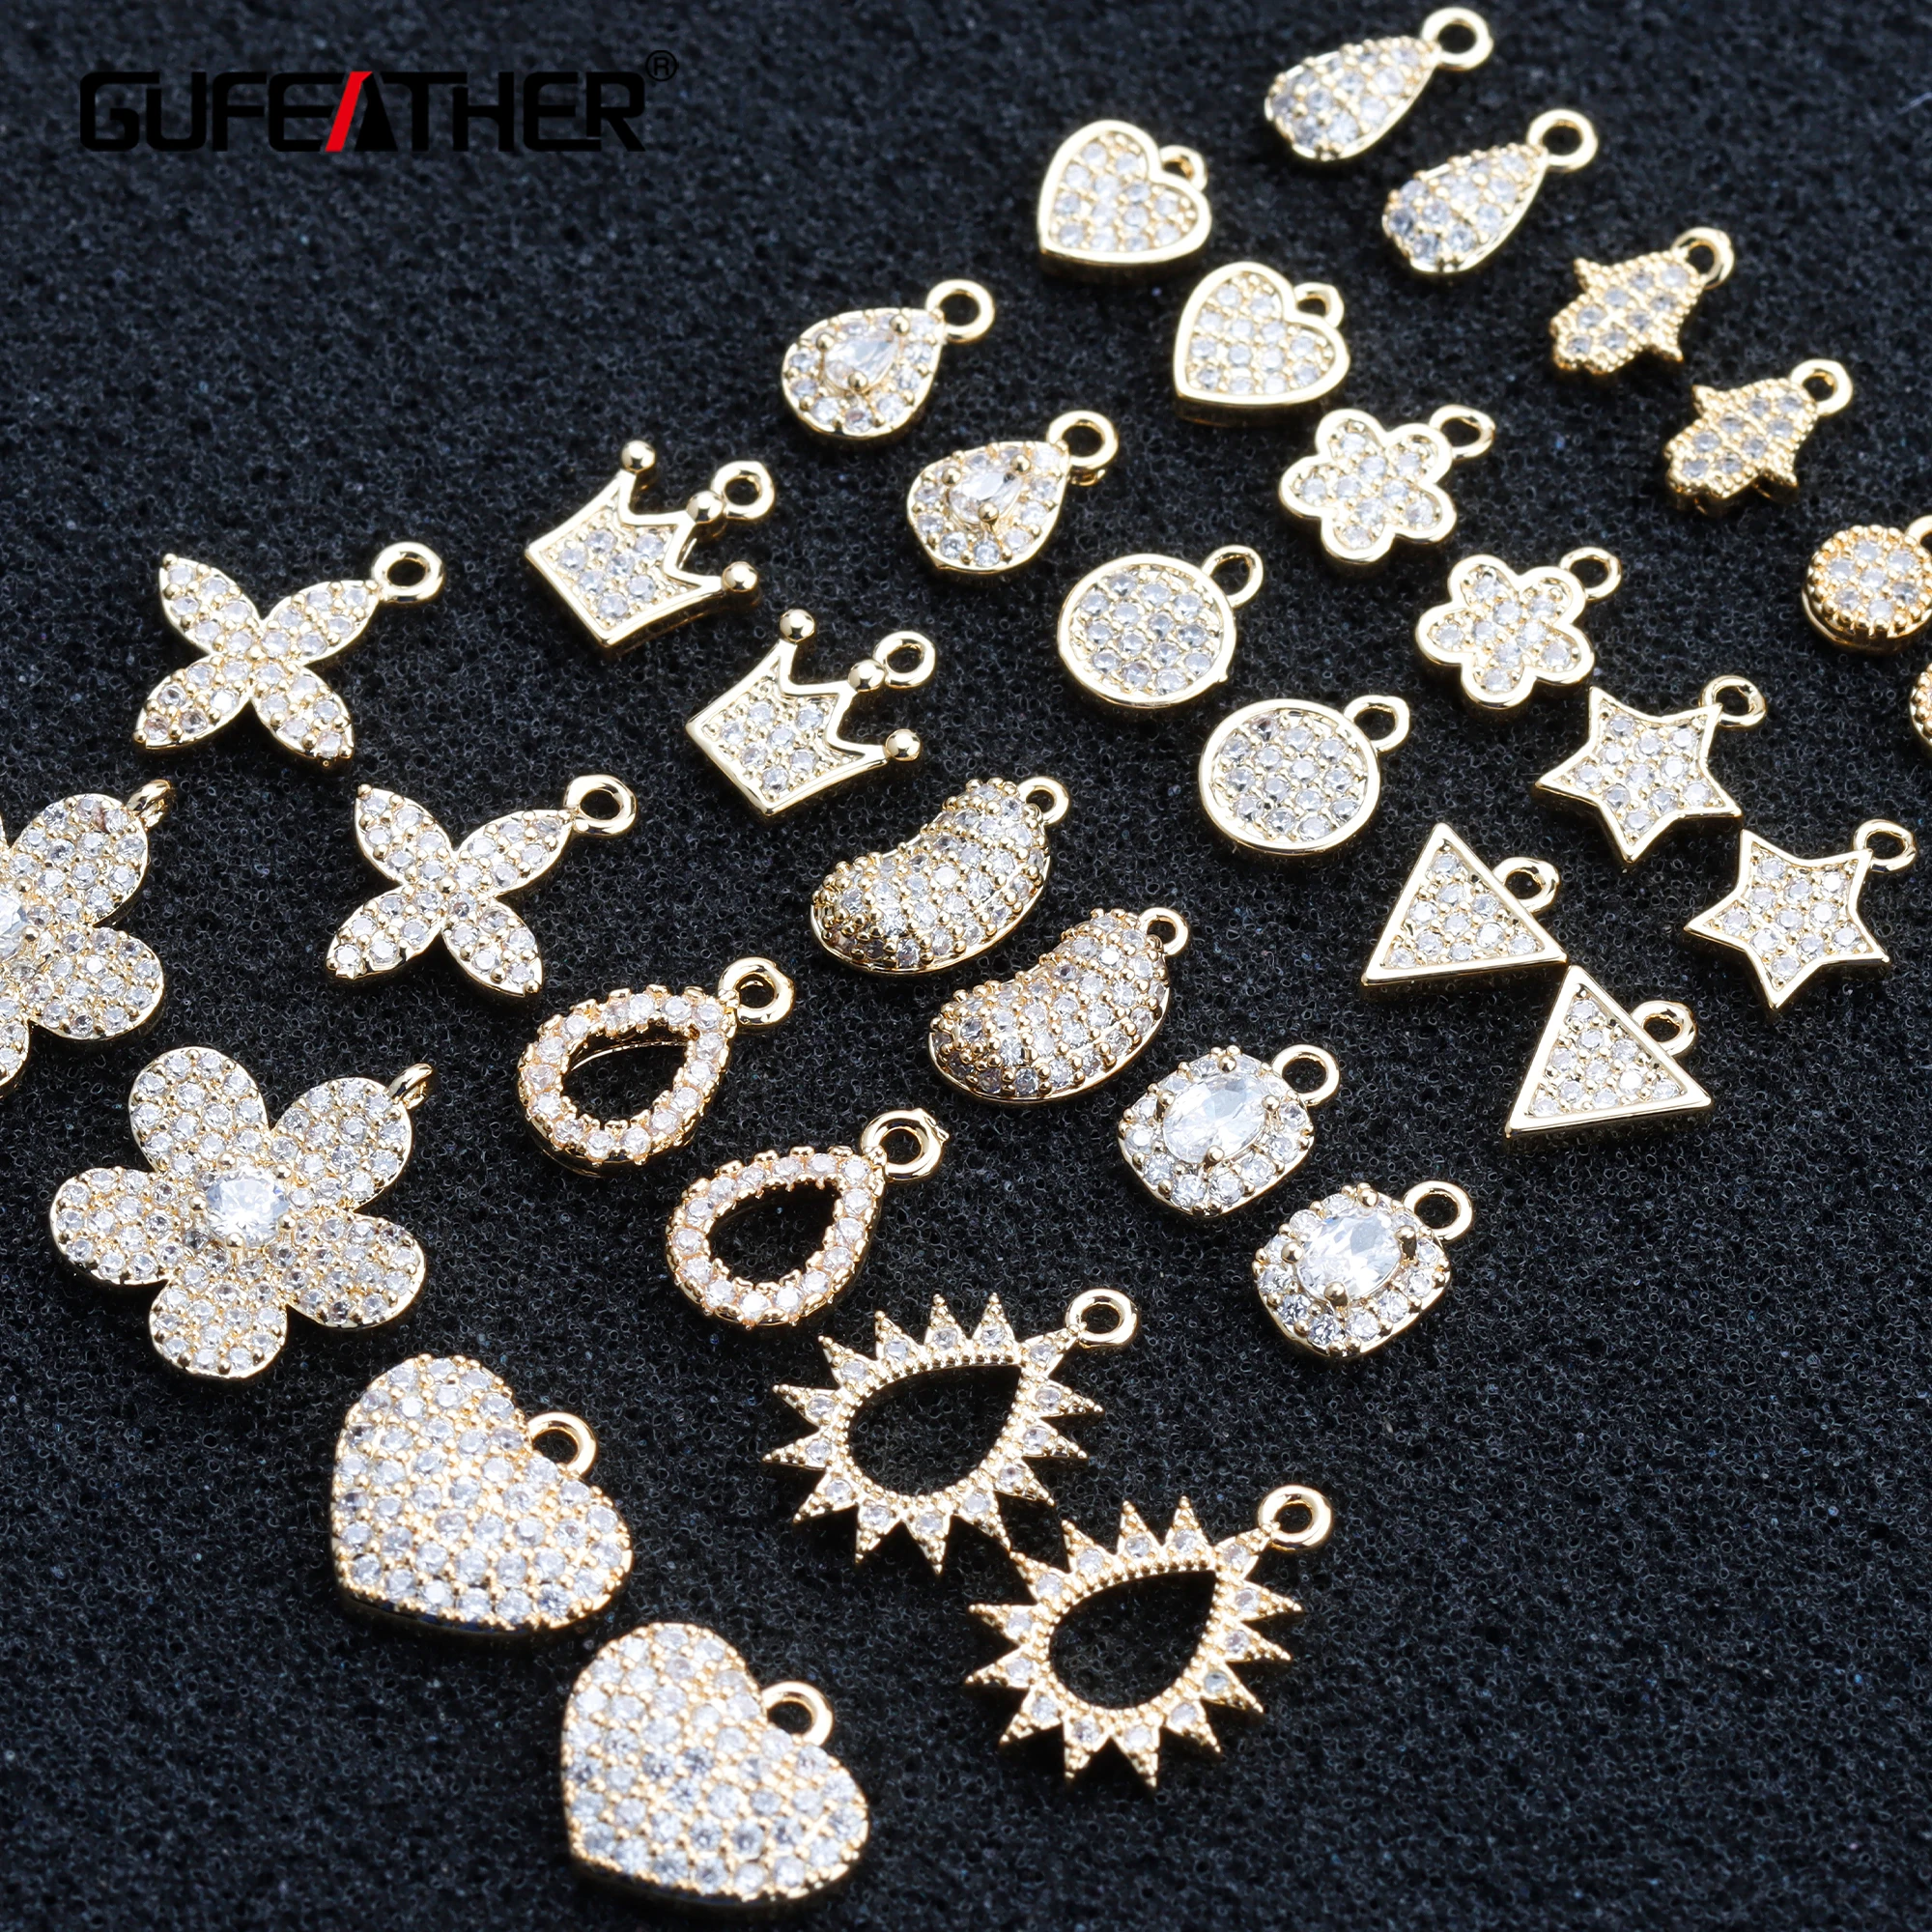 

GUFEATHER M907,jewelry accessories,pass REACH,nickel free,18k gold plated,zircon,copper,earring pendant,jewelry making,20pcs/lot